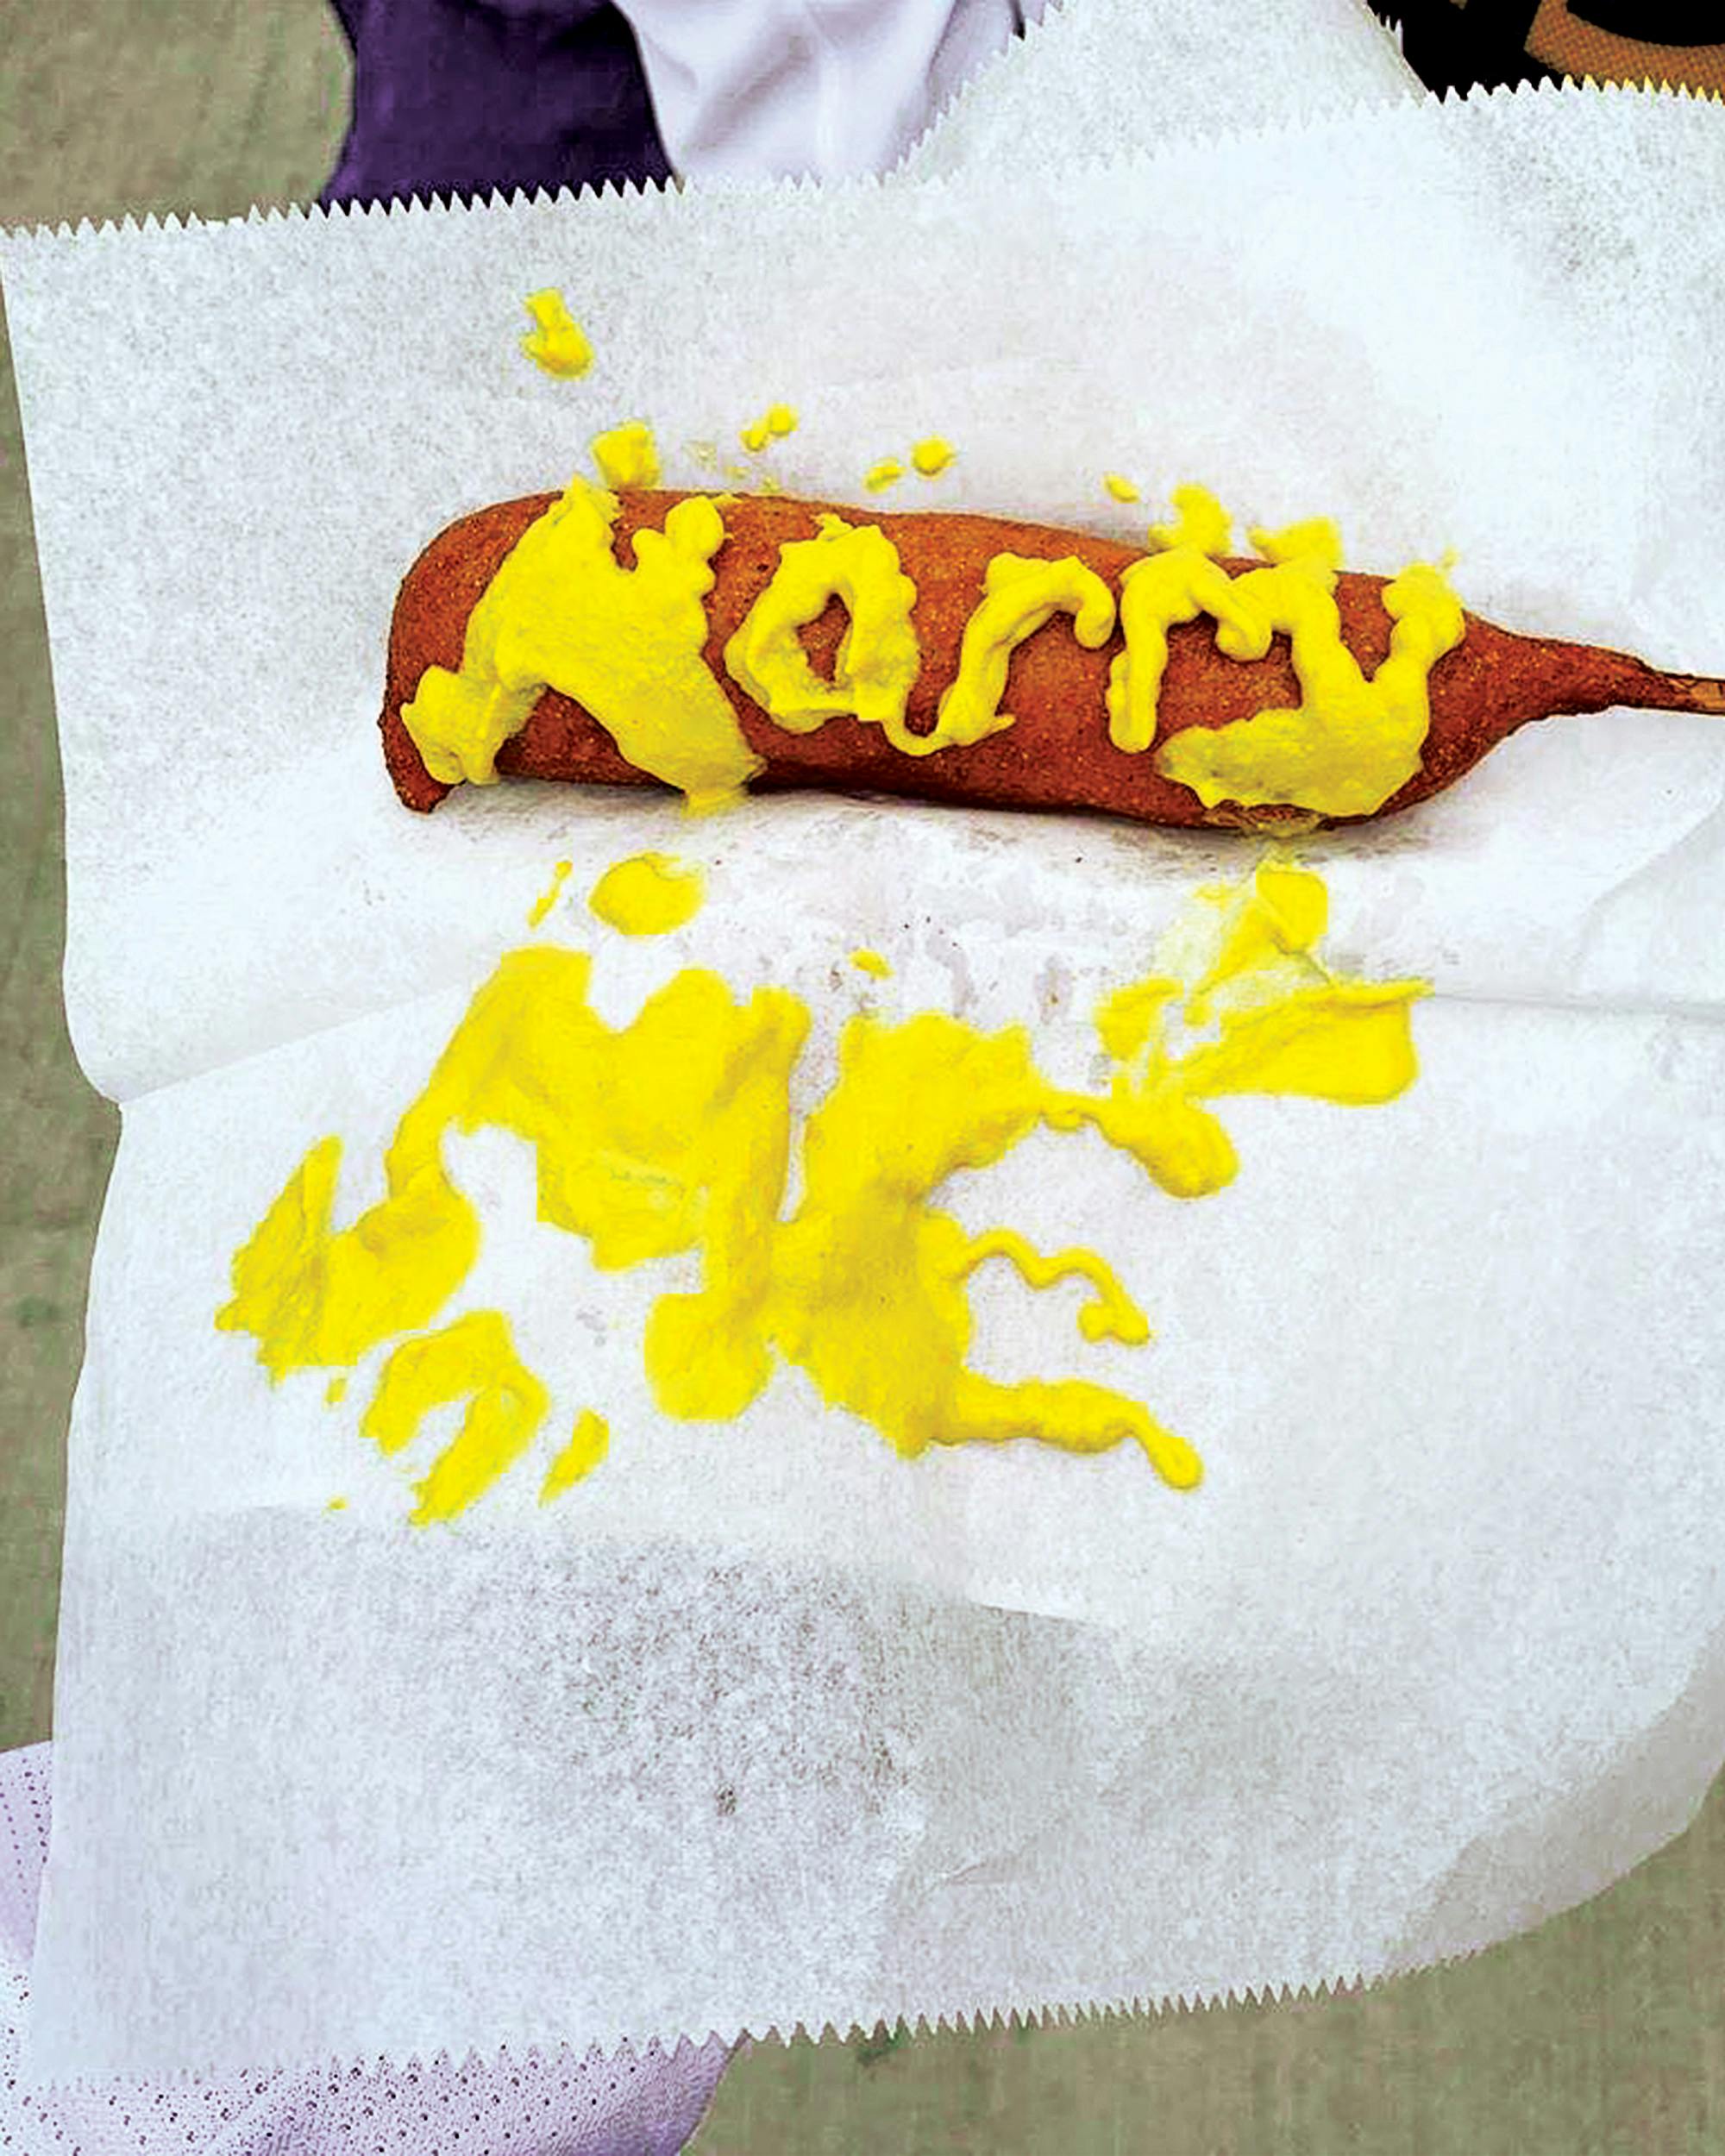 A man used mustard on a corn dog to propose to his fiancée